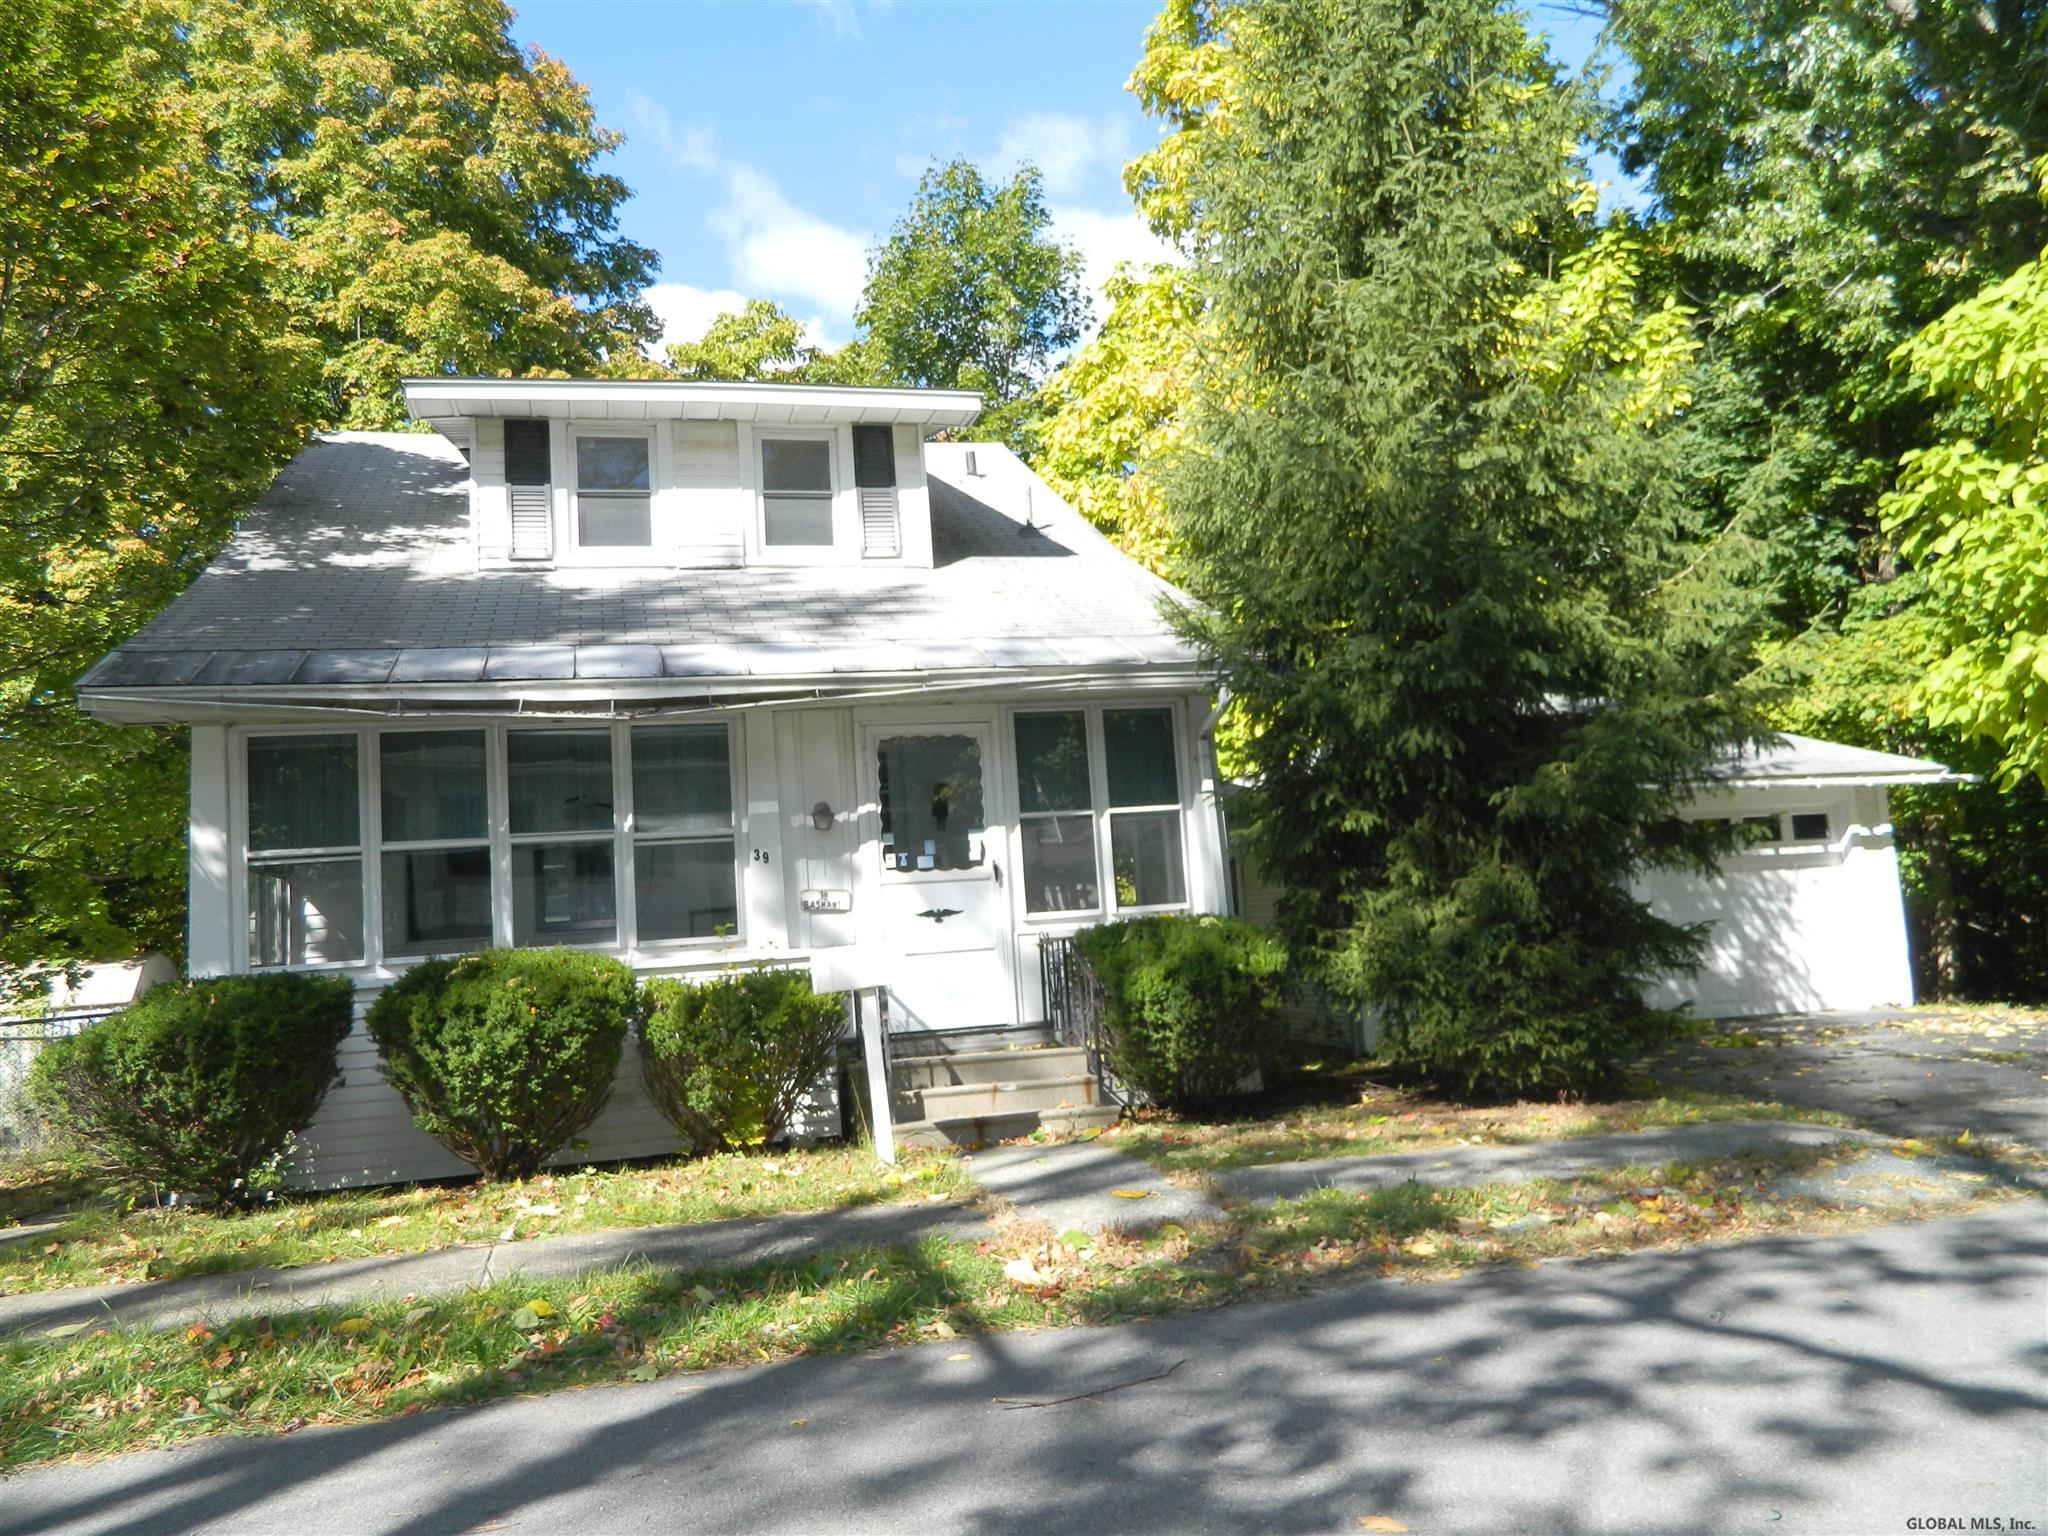 39 MUNGER ST in Rensselaer, NY Listed For 85,000.00 by